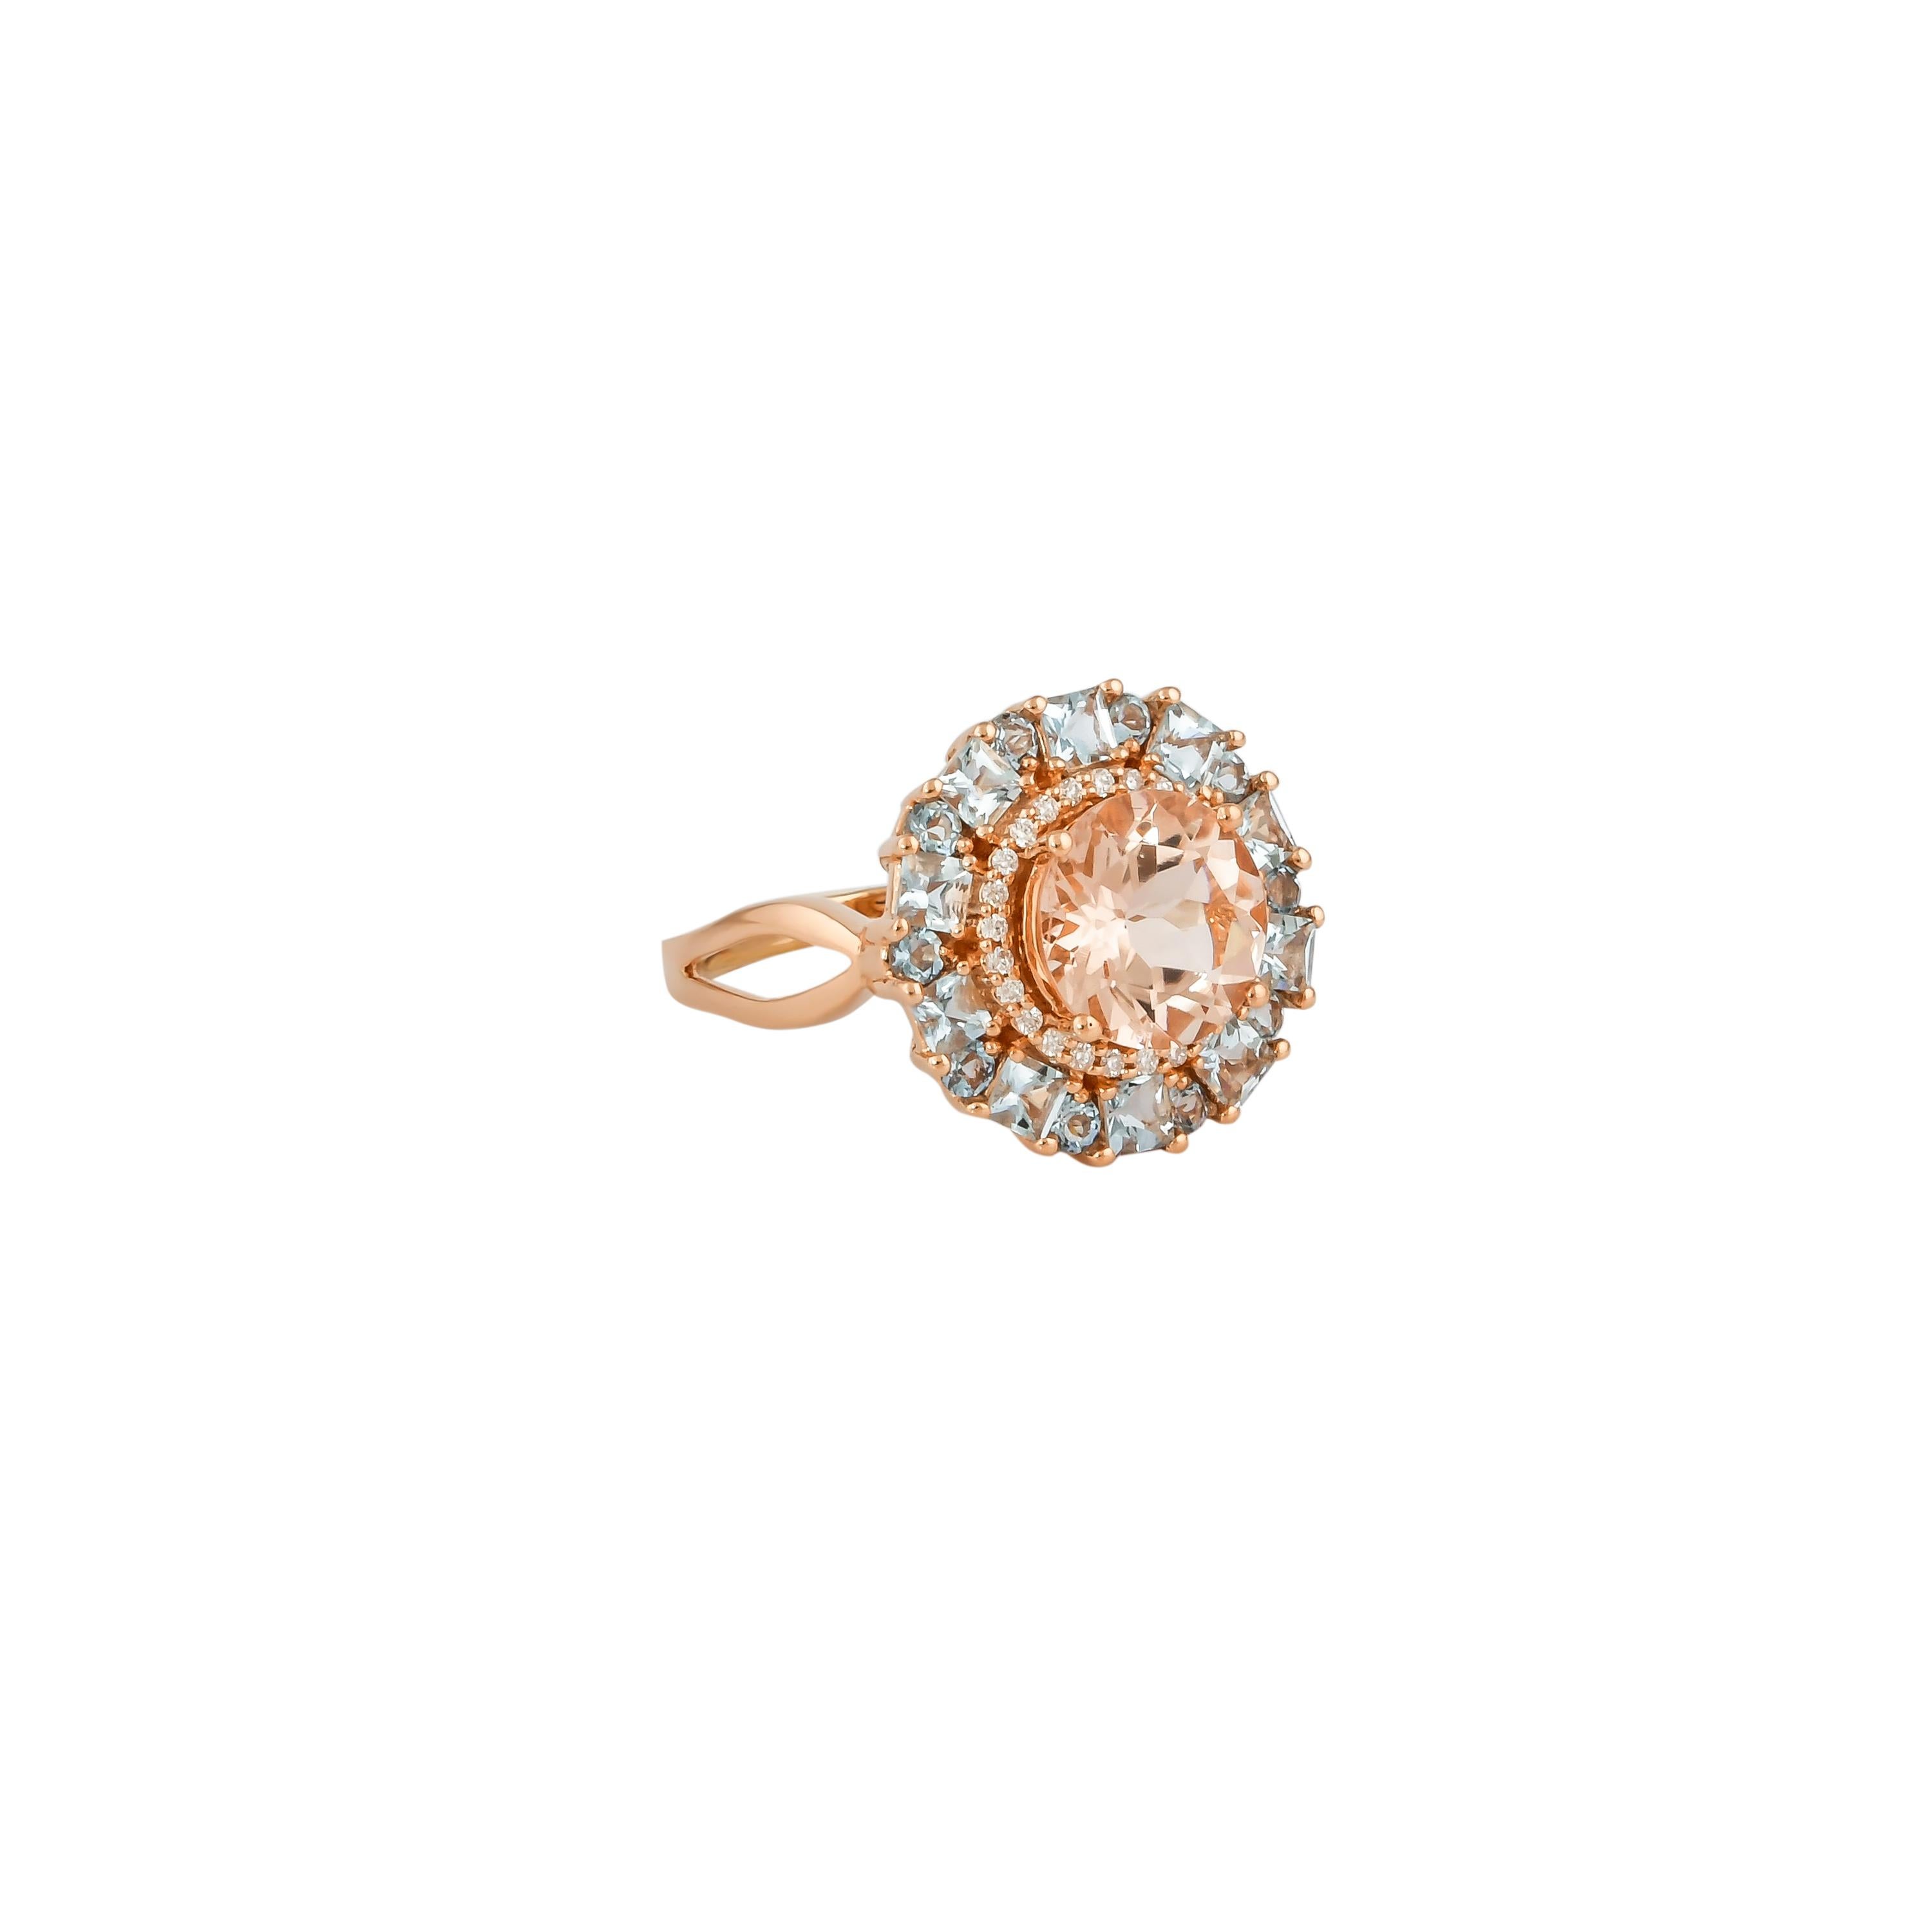 This collection features an array of magnificent morganites! Accented with Aquamarine and Diamond these rings are made in rose gold and present a classic yet elegant look.

Classic morganite ring in 18K Rose gold with Aquamarine and Diamond.